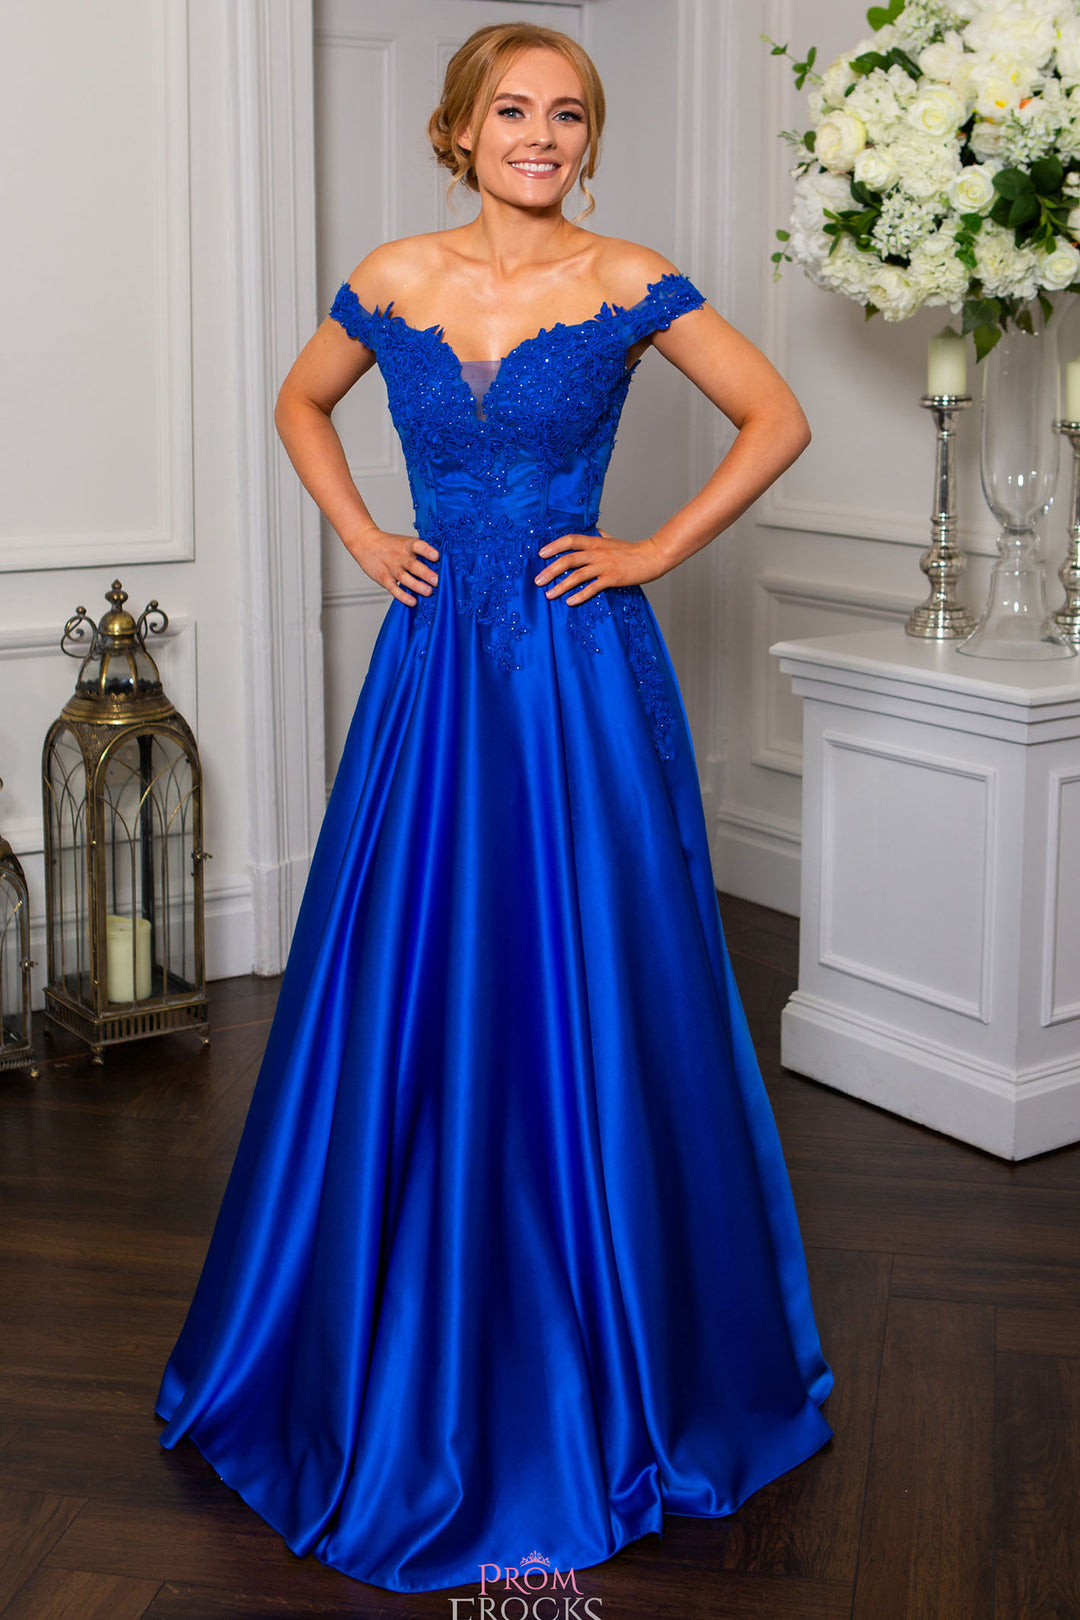 Prom Frocks PF9603 Royal Blue Satin Prom Dress - Dotique Chesterfield